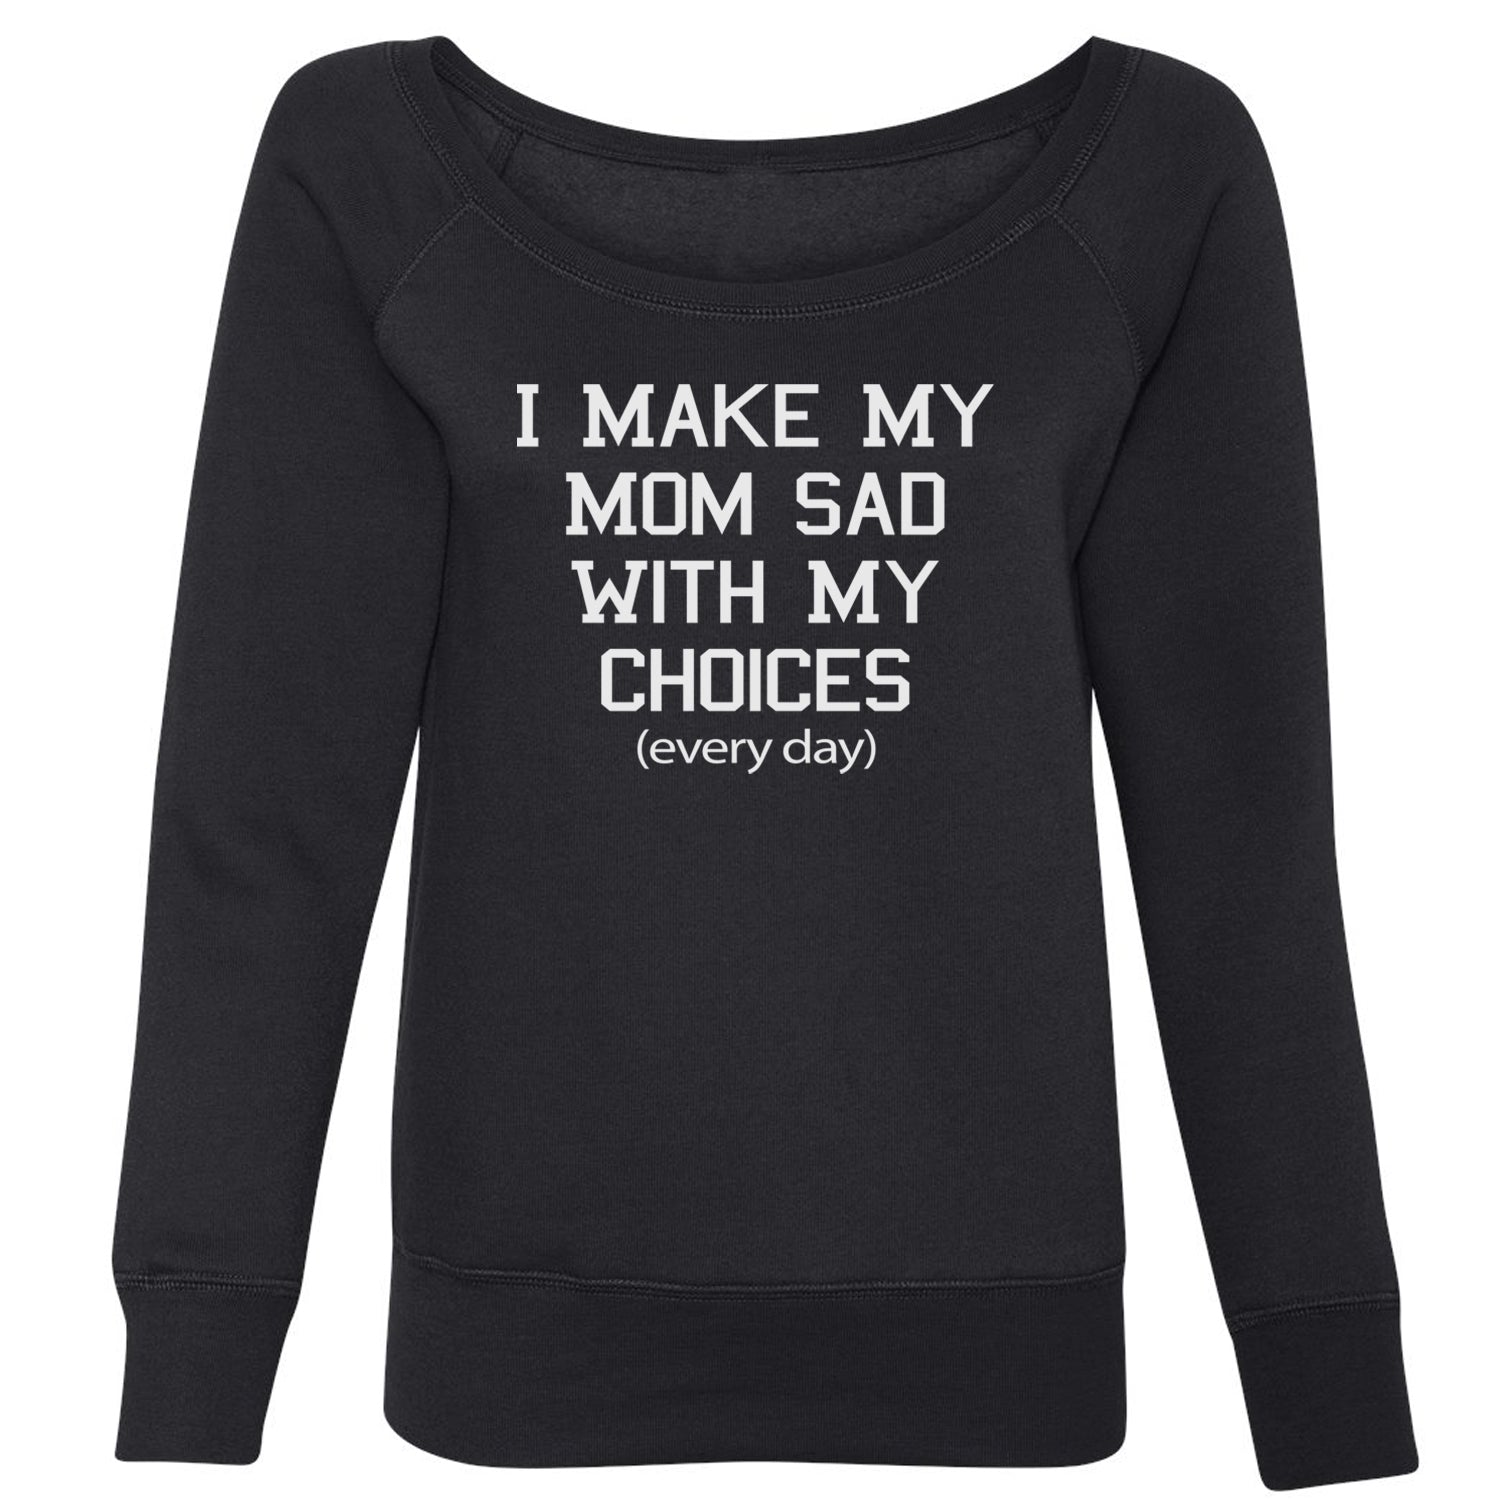 I Make My Mom Sad With My Choices Every Day Slouchy Off Shoulder Oversized Sweatshirt funny, ironic, meme by Expression Tees